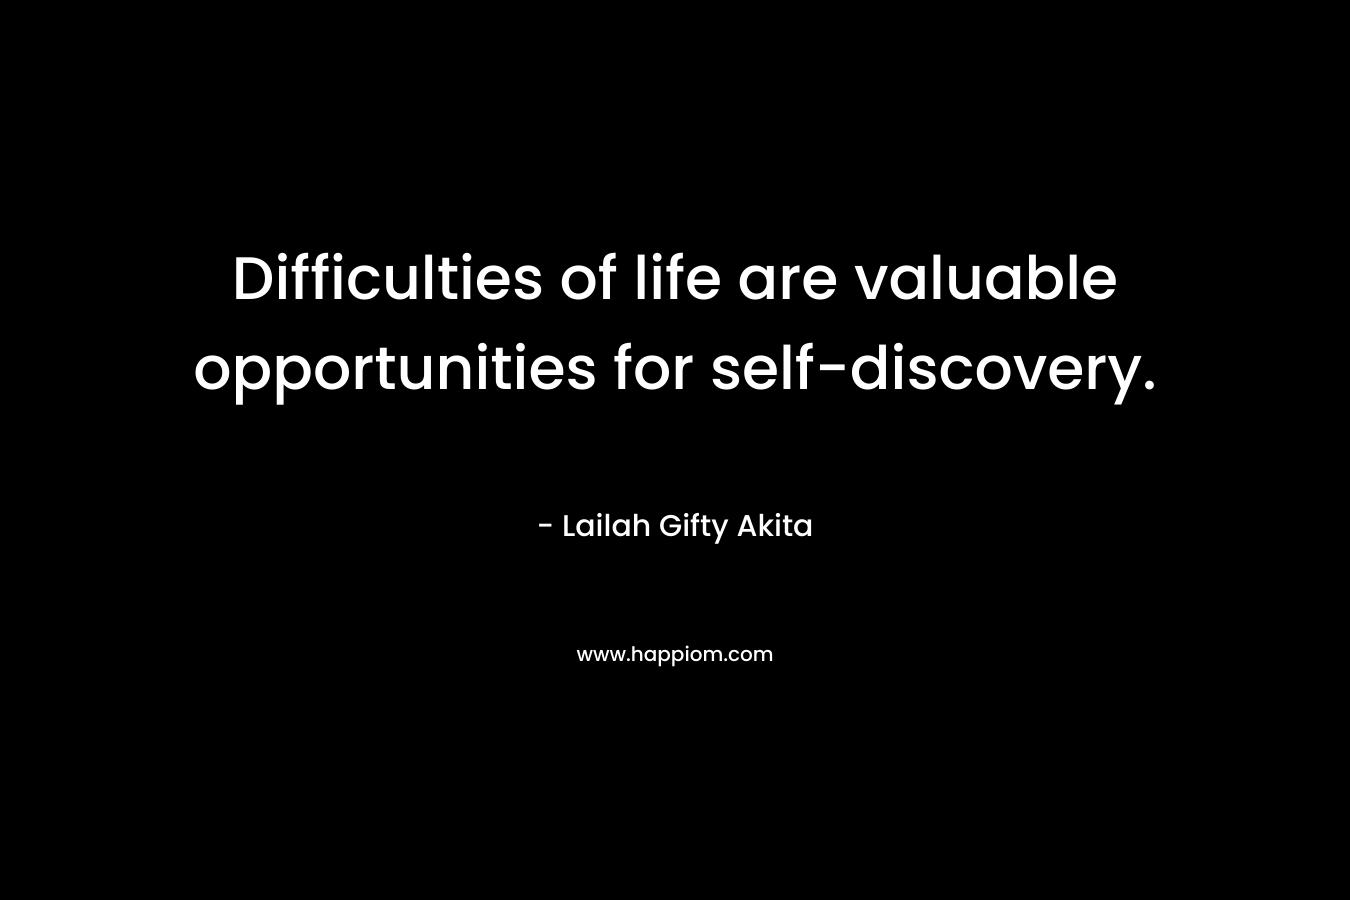 Difficulties of life are valuable opportunities for self-discovery.